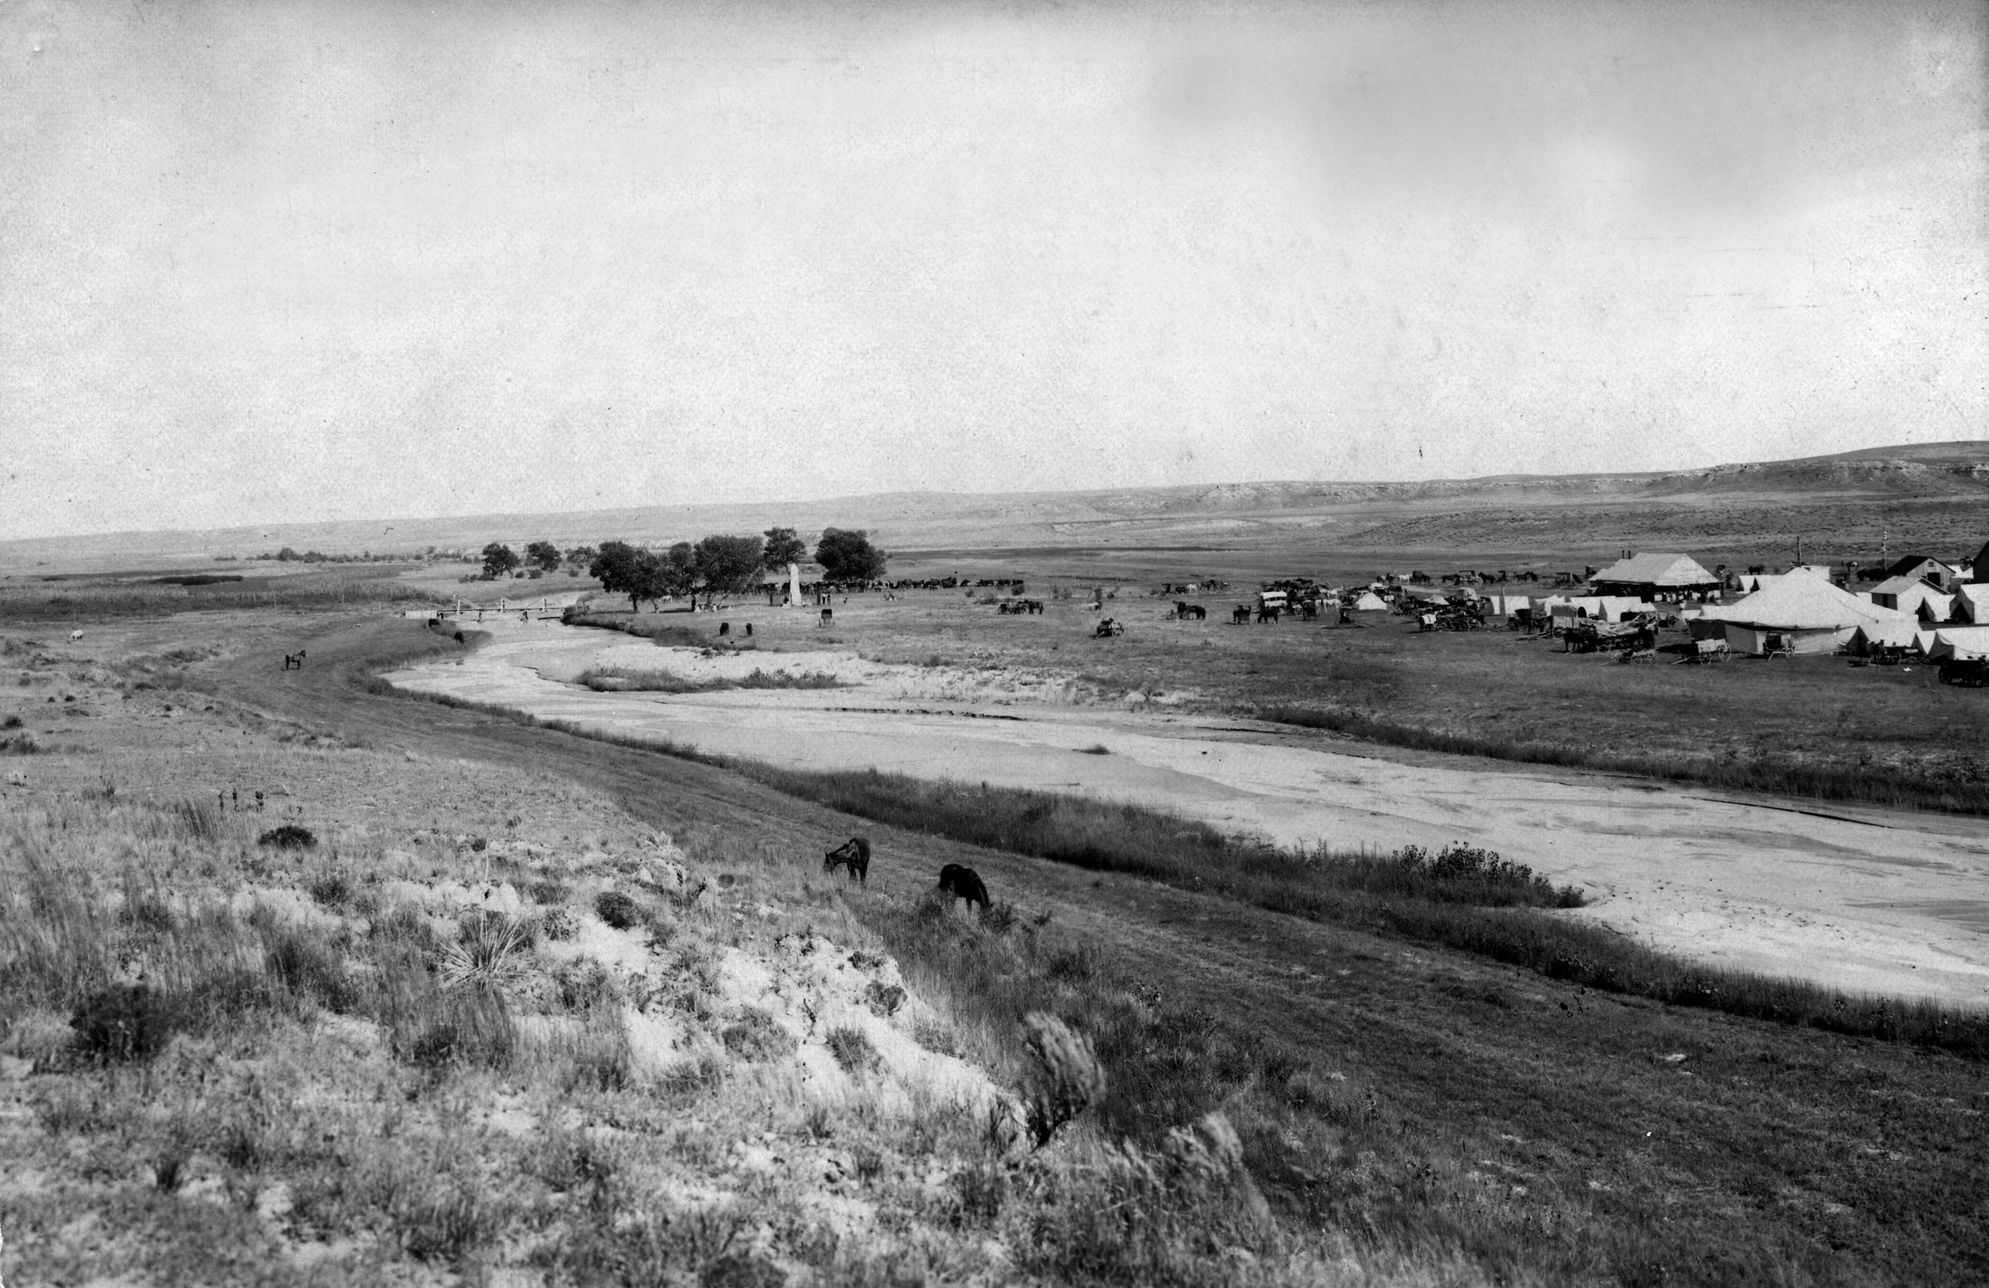 The Arikaree River, site of the battle, is shown in this 1917 photograph of the annual reunion of Forsyth’s Scouts. Beecher Island had washed away by the time the photo was taken.